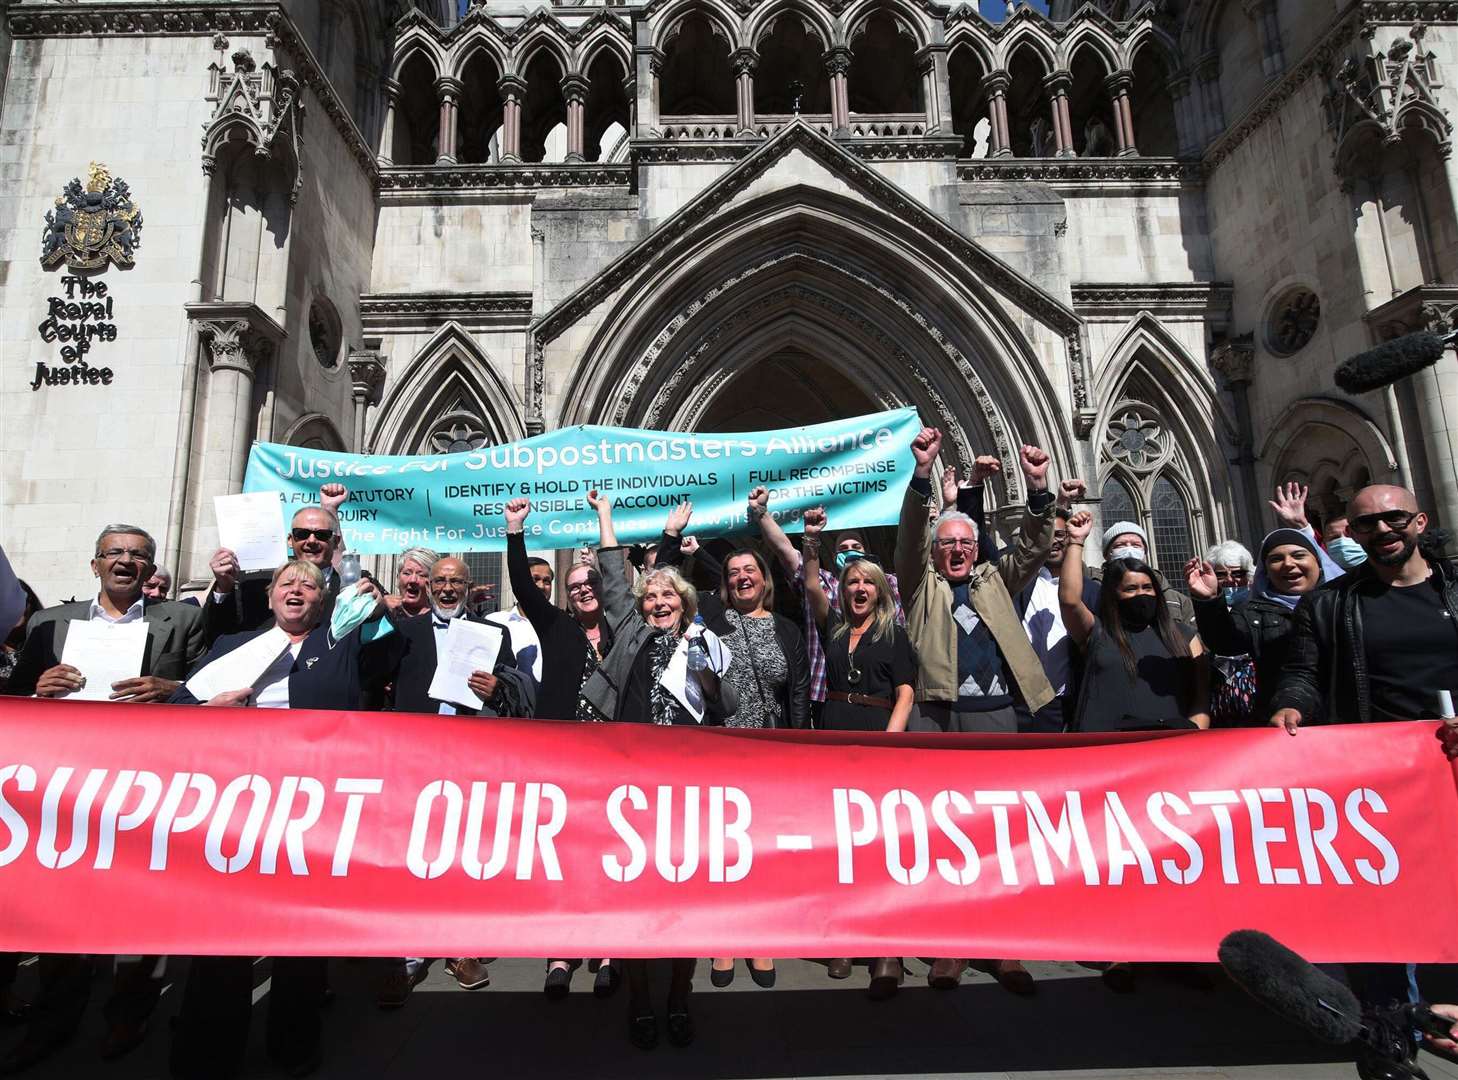 Former post office workers celebrating outside the Royal Courts of Justice after their convictions were overturned by the Court of Appeal in 2021. Photo: ITV